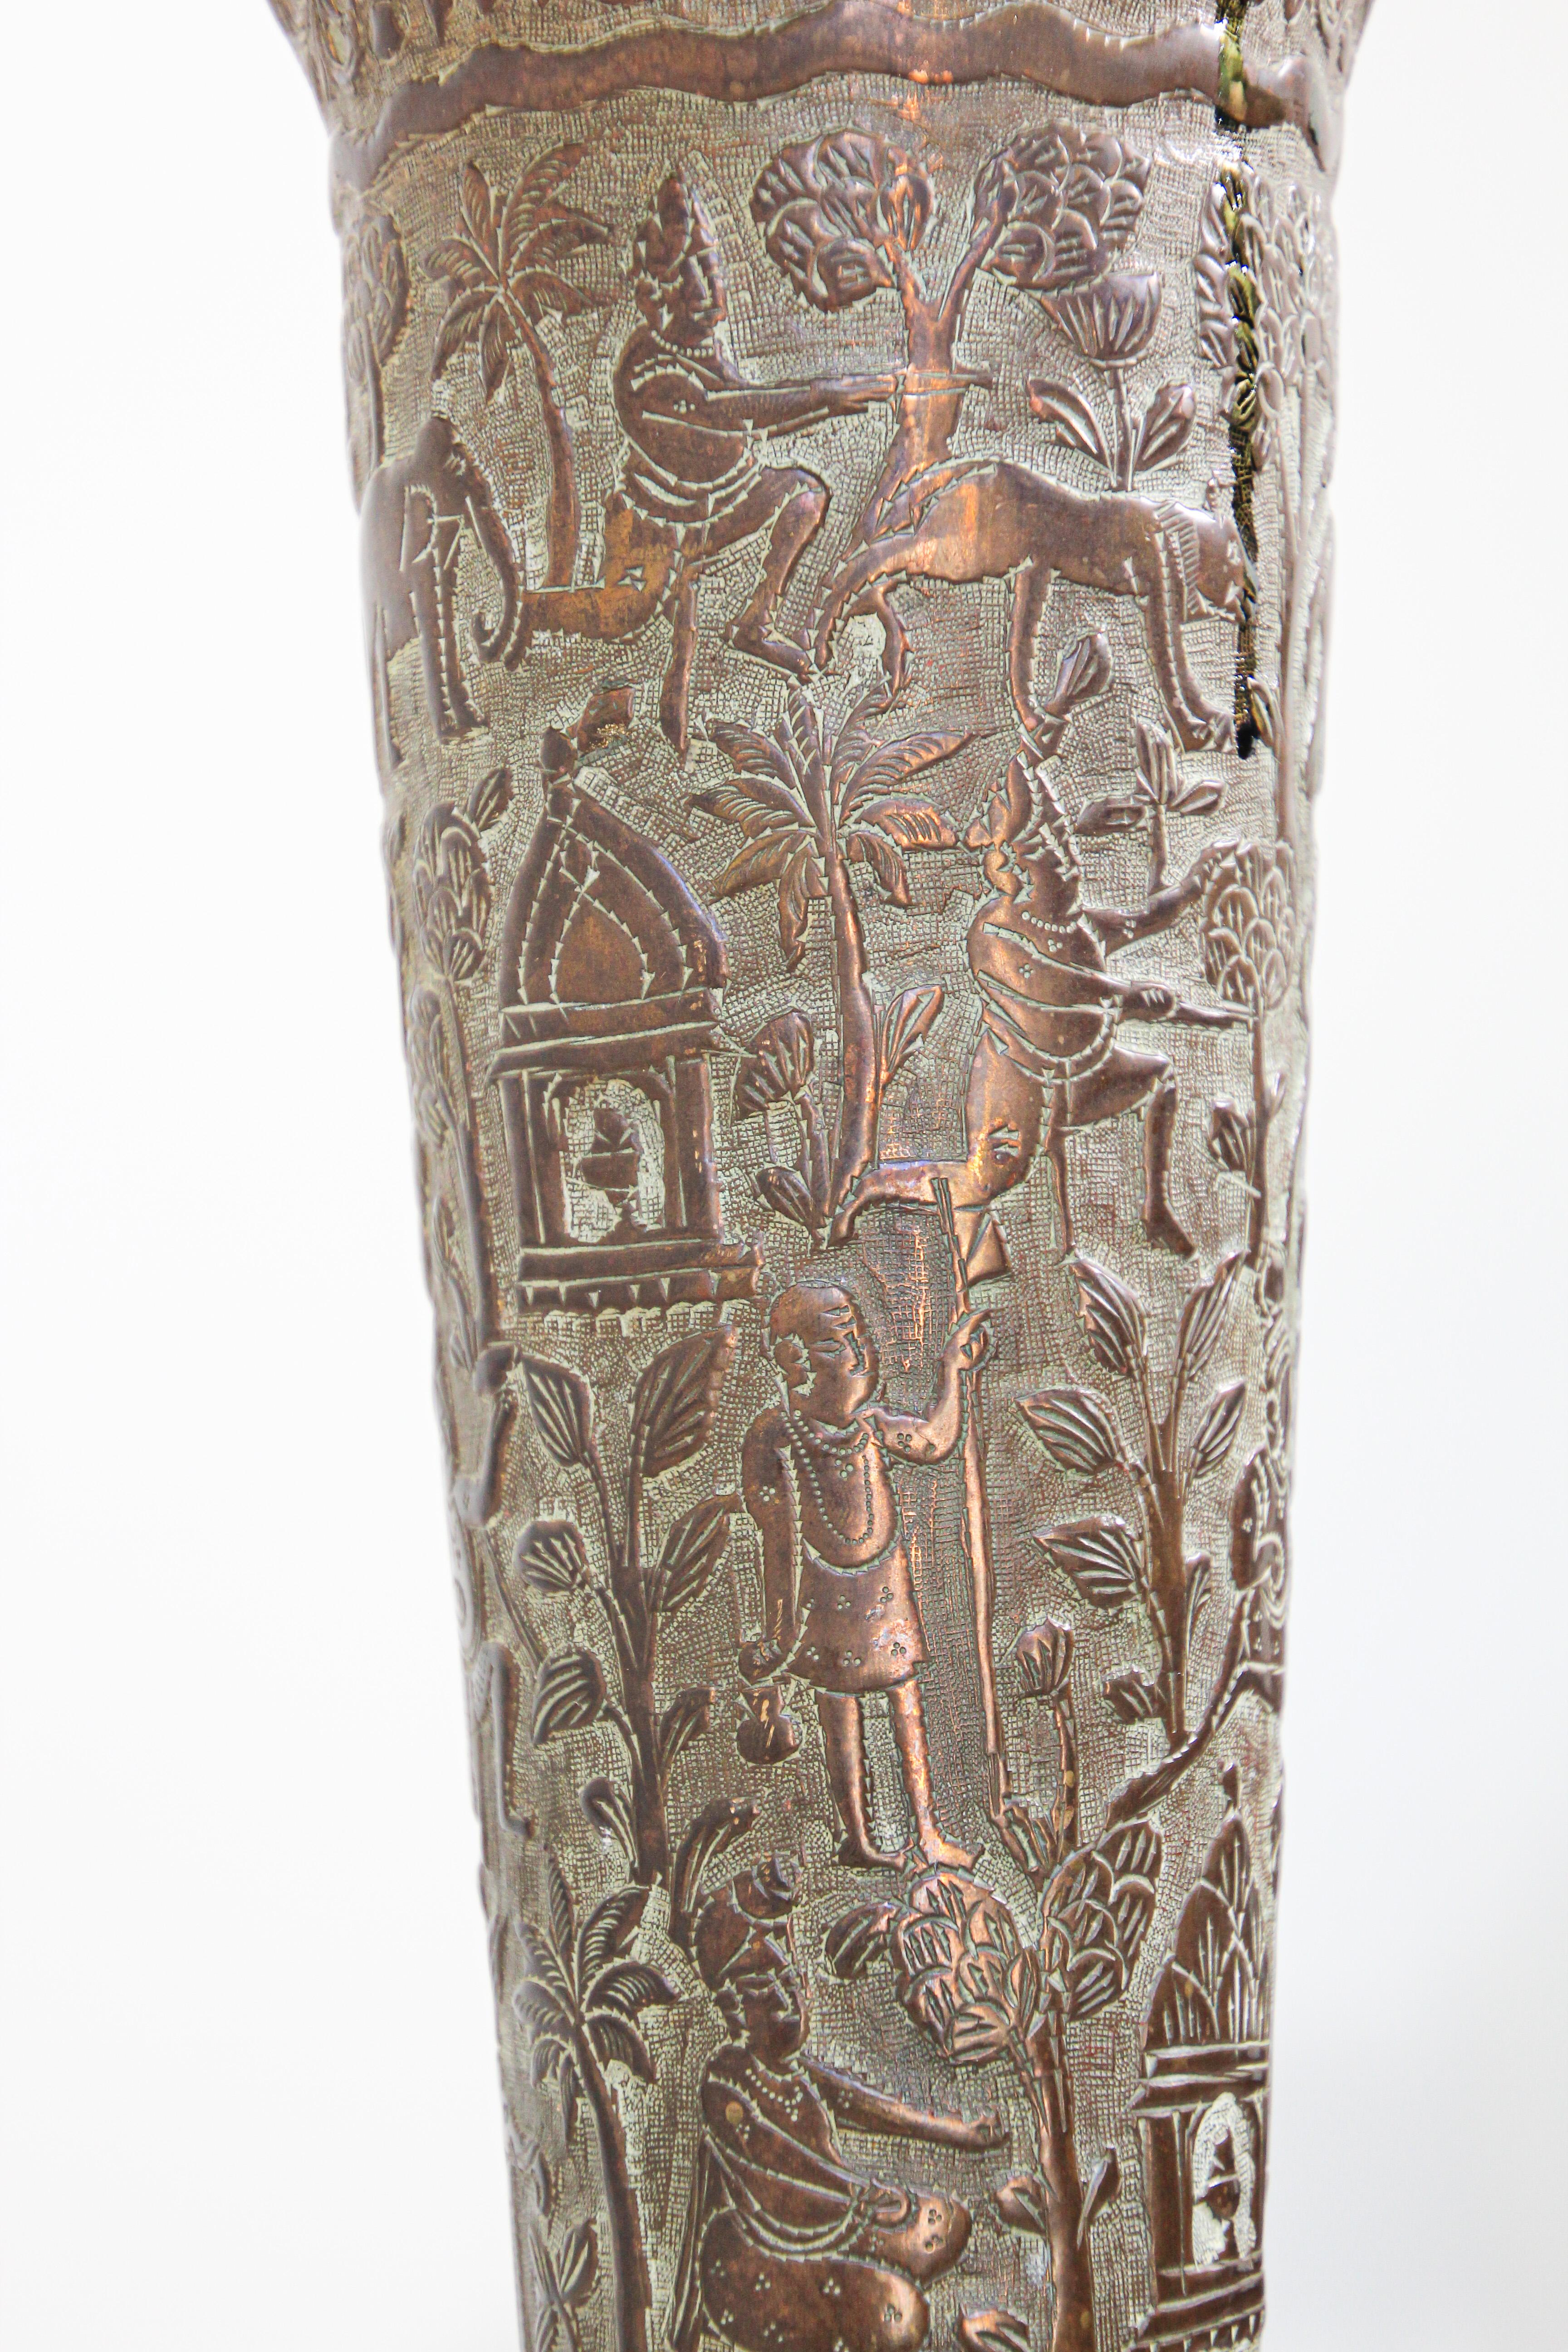 Antique Copper Vase with Hindu Scenes, 19th Century In Good Condition For Sale In North Hollywood, CA